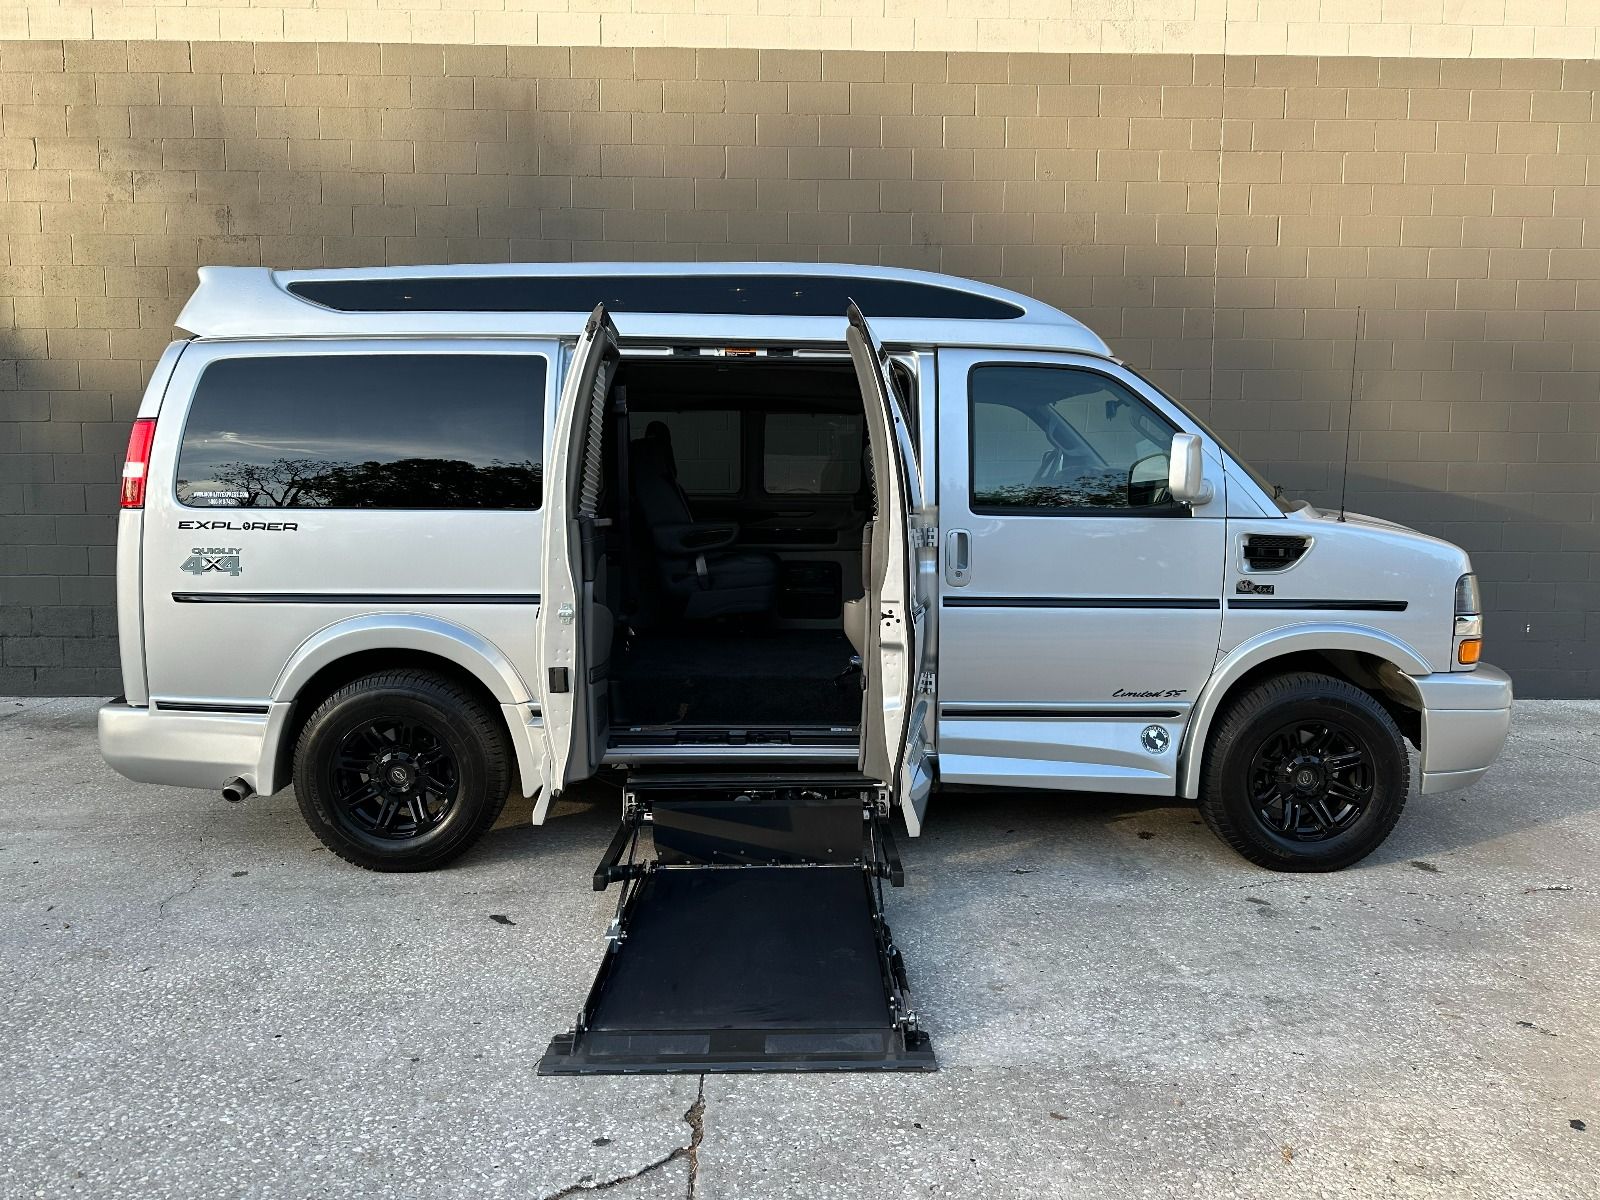 Silver Chevrolet Express Full Size Wheelchair Van with lift deployed from passenger side rear doors.